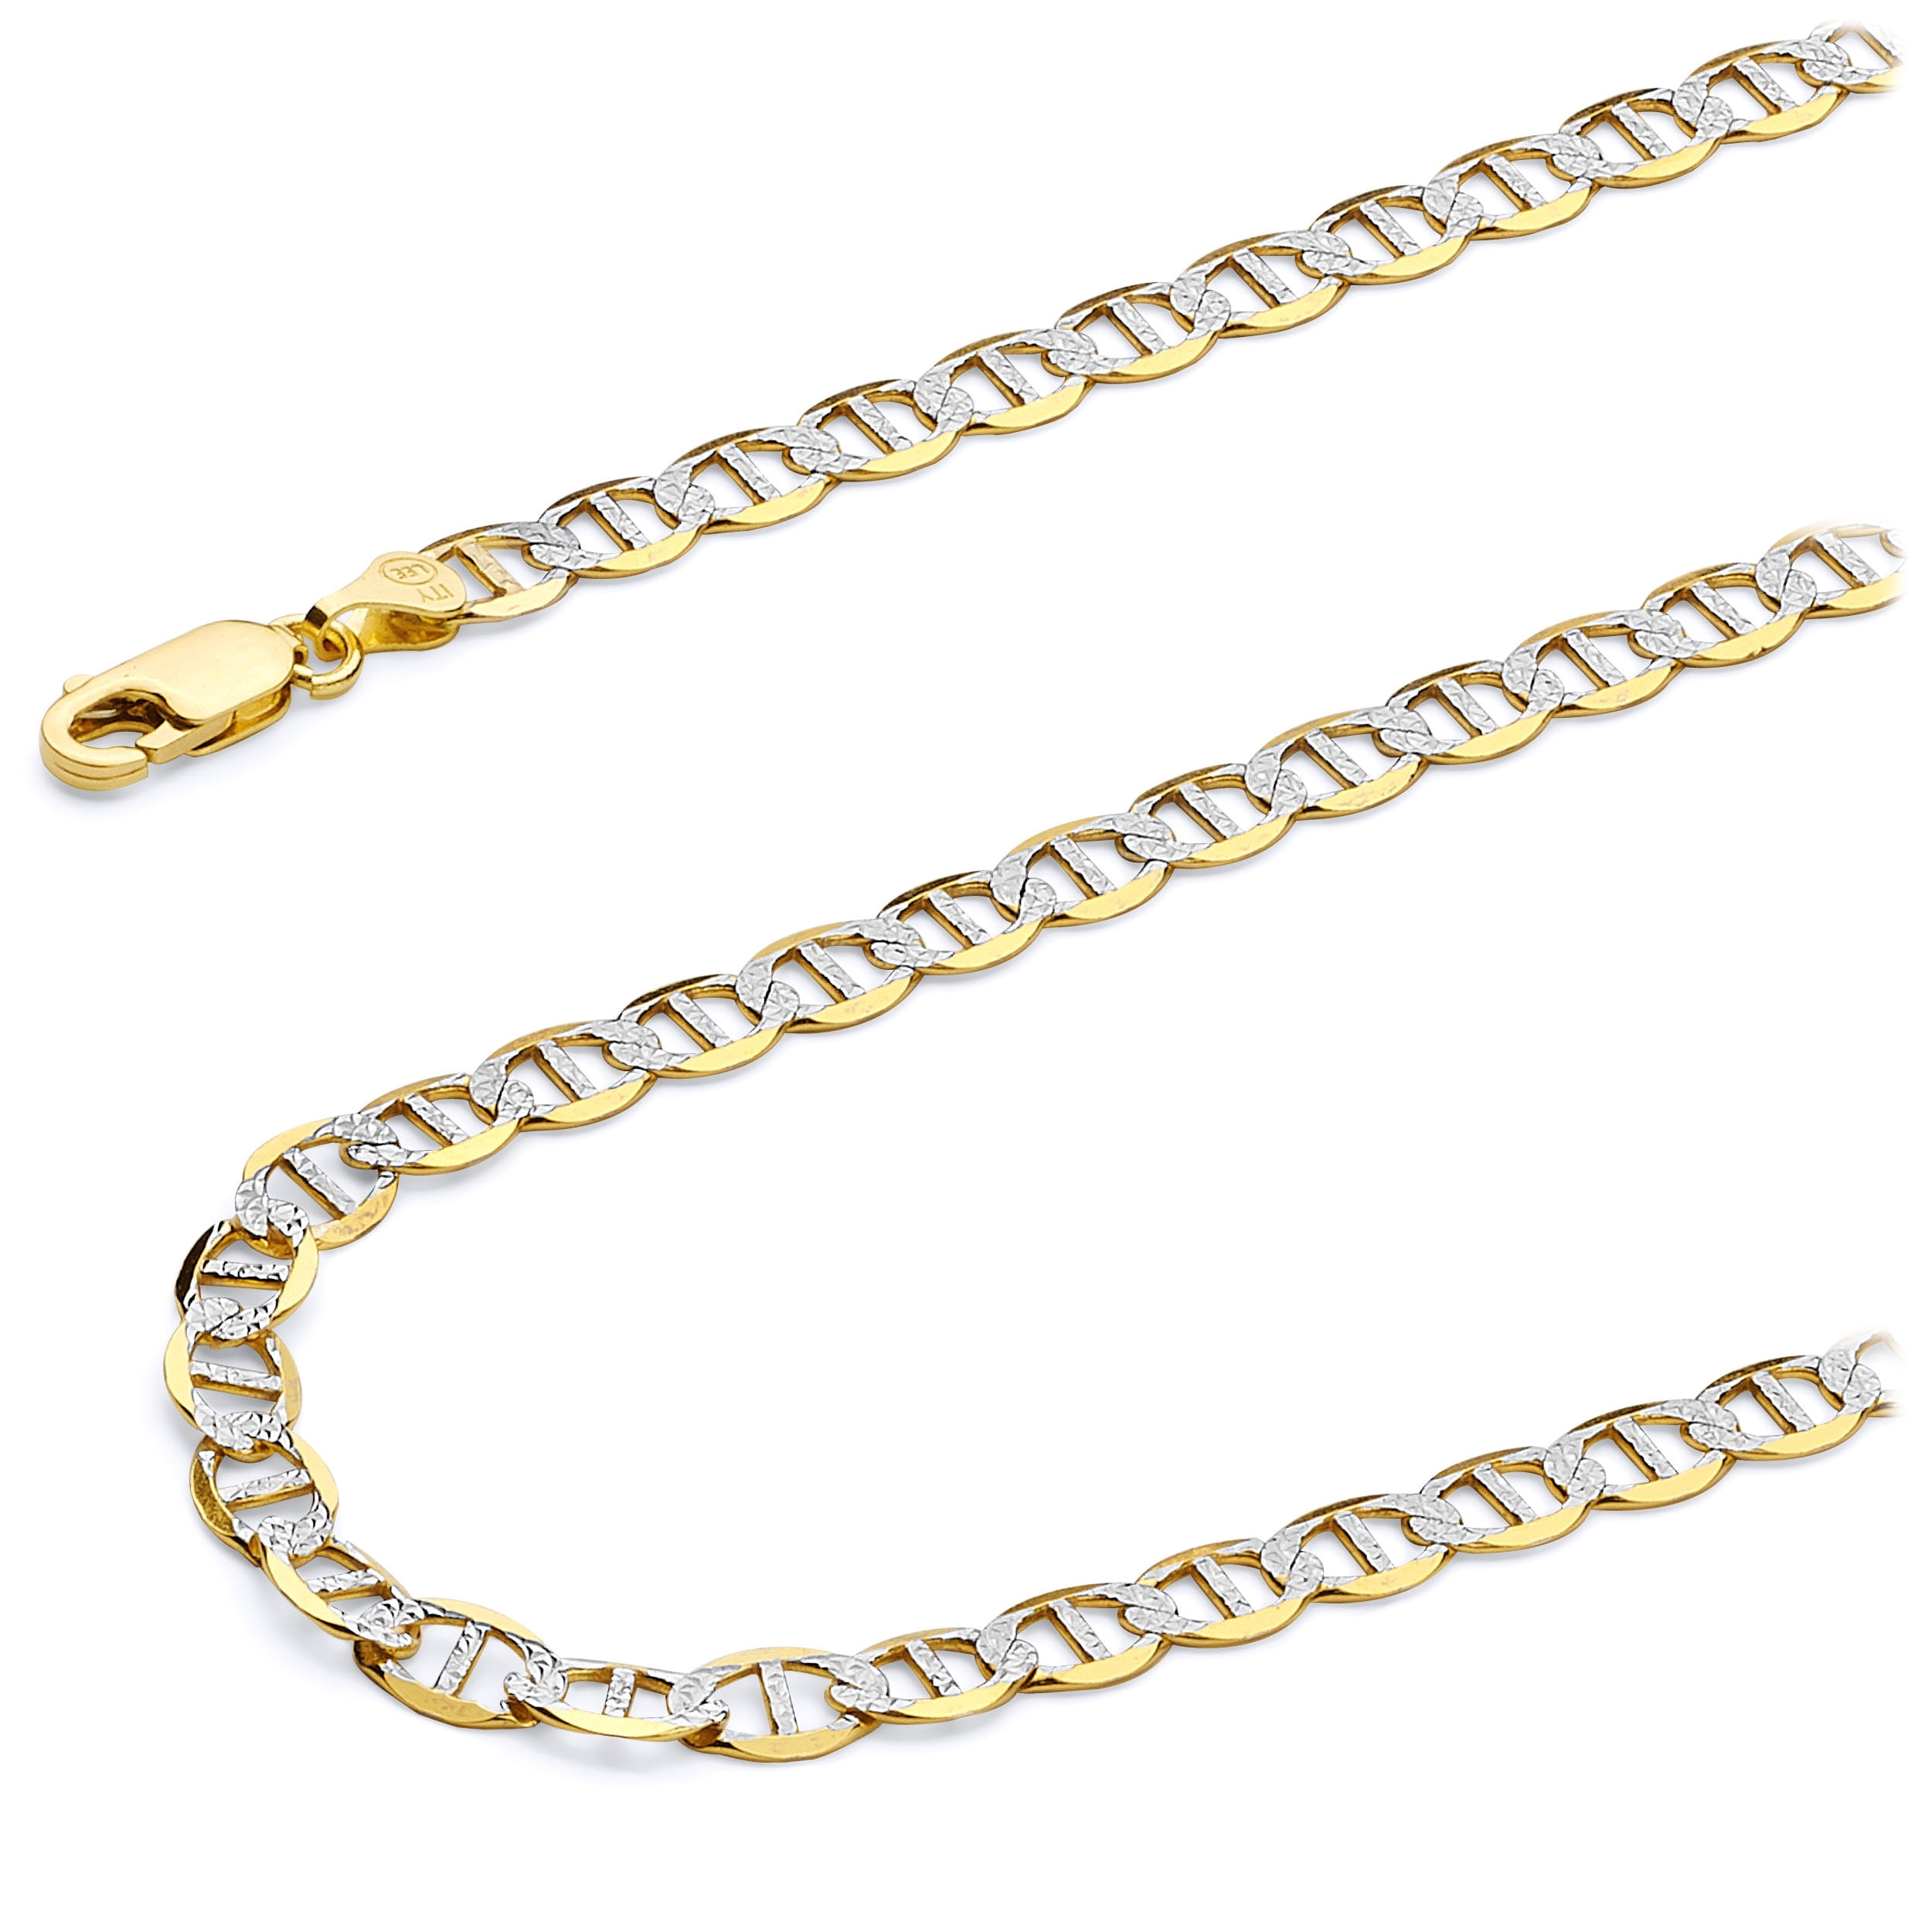 Wellingsale 14k Yellow Gold Polished 3.5mm HOLLOW Mariner Chain Necklace